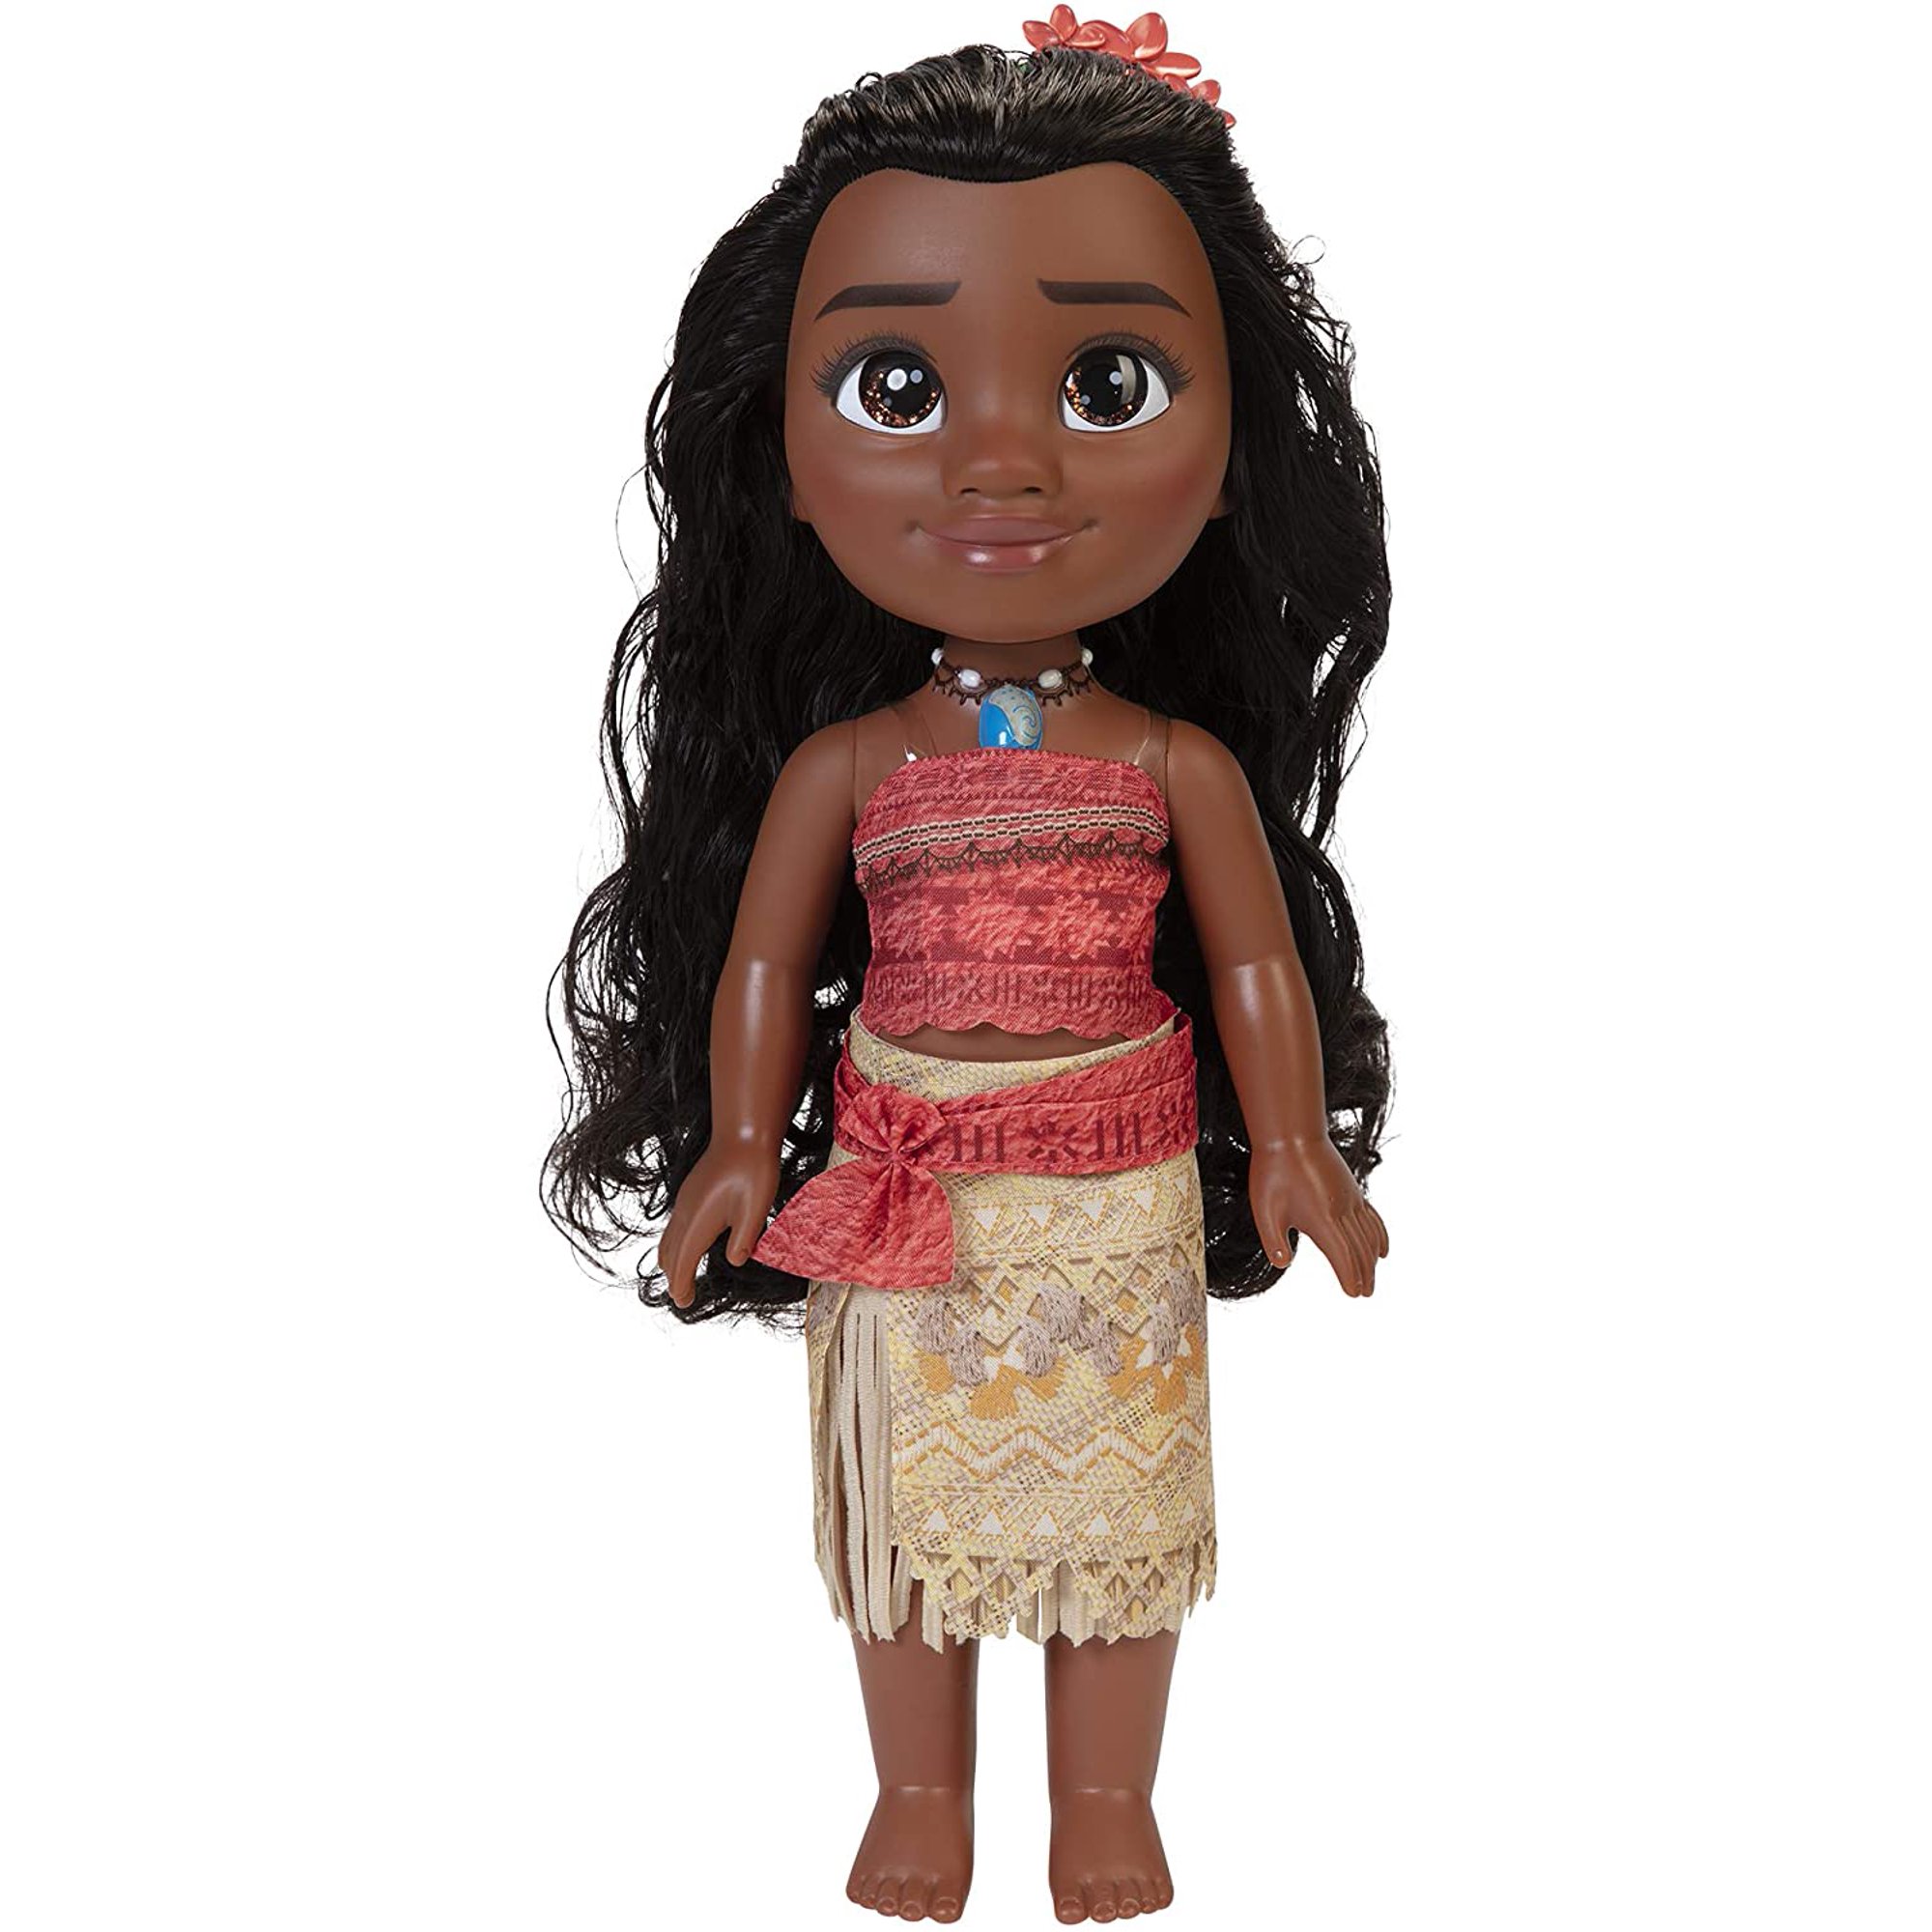 Disney Princess My Friend Moana 14 Inch Toddler Doll with Removable Outfit